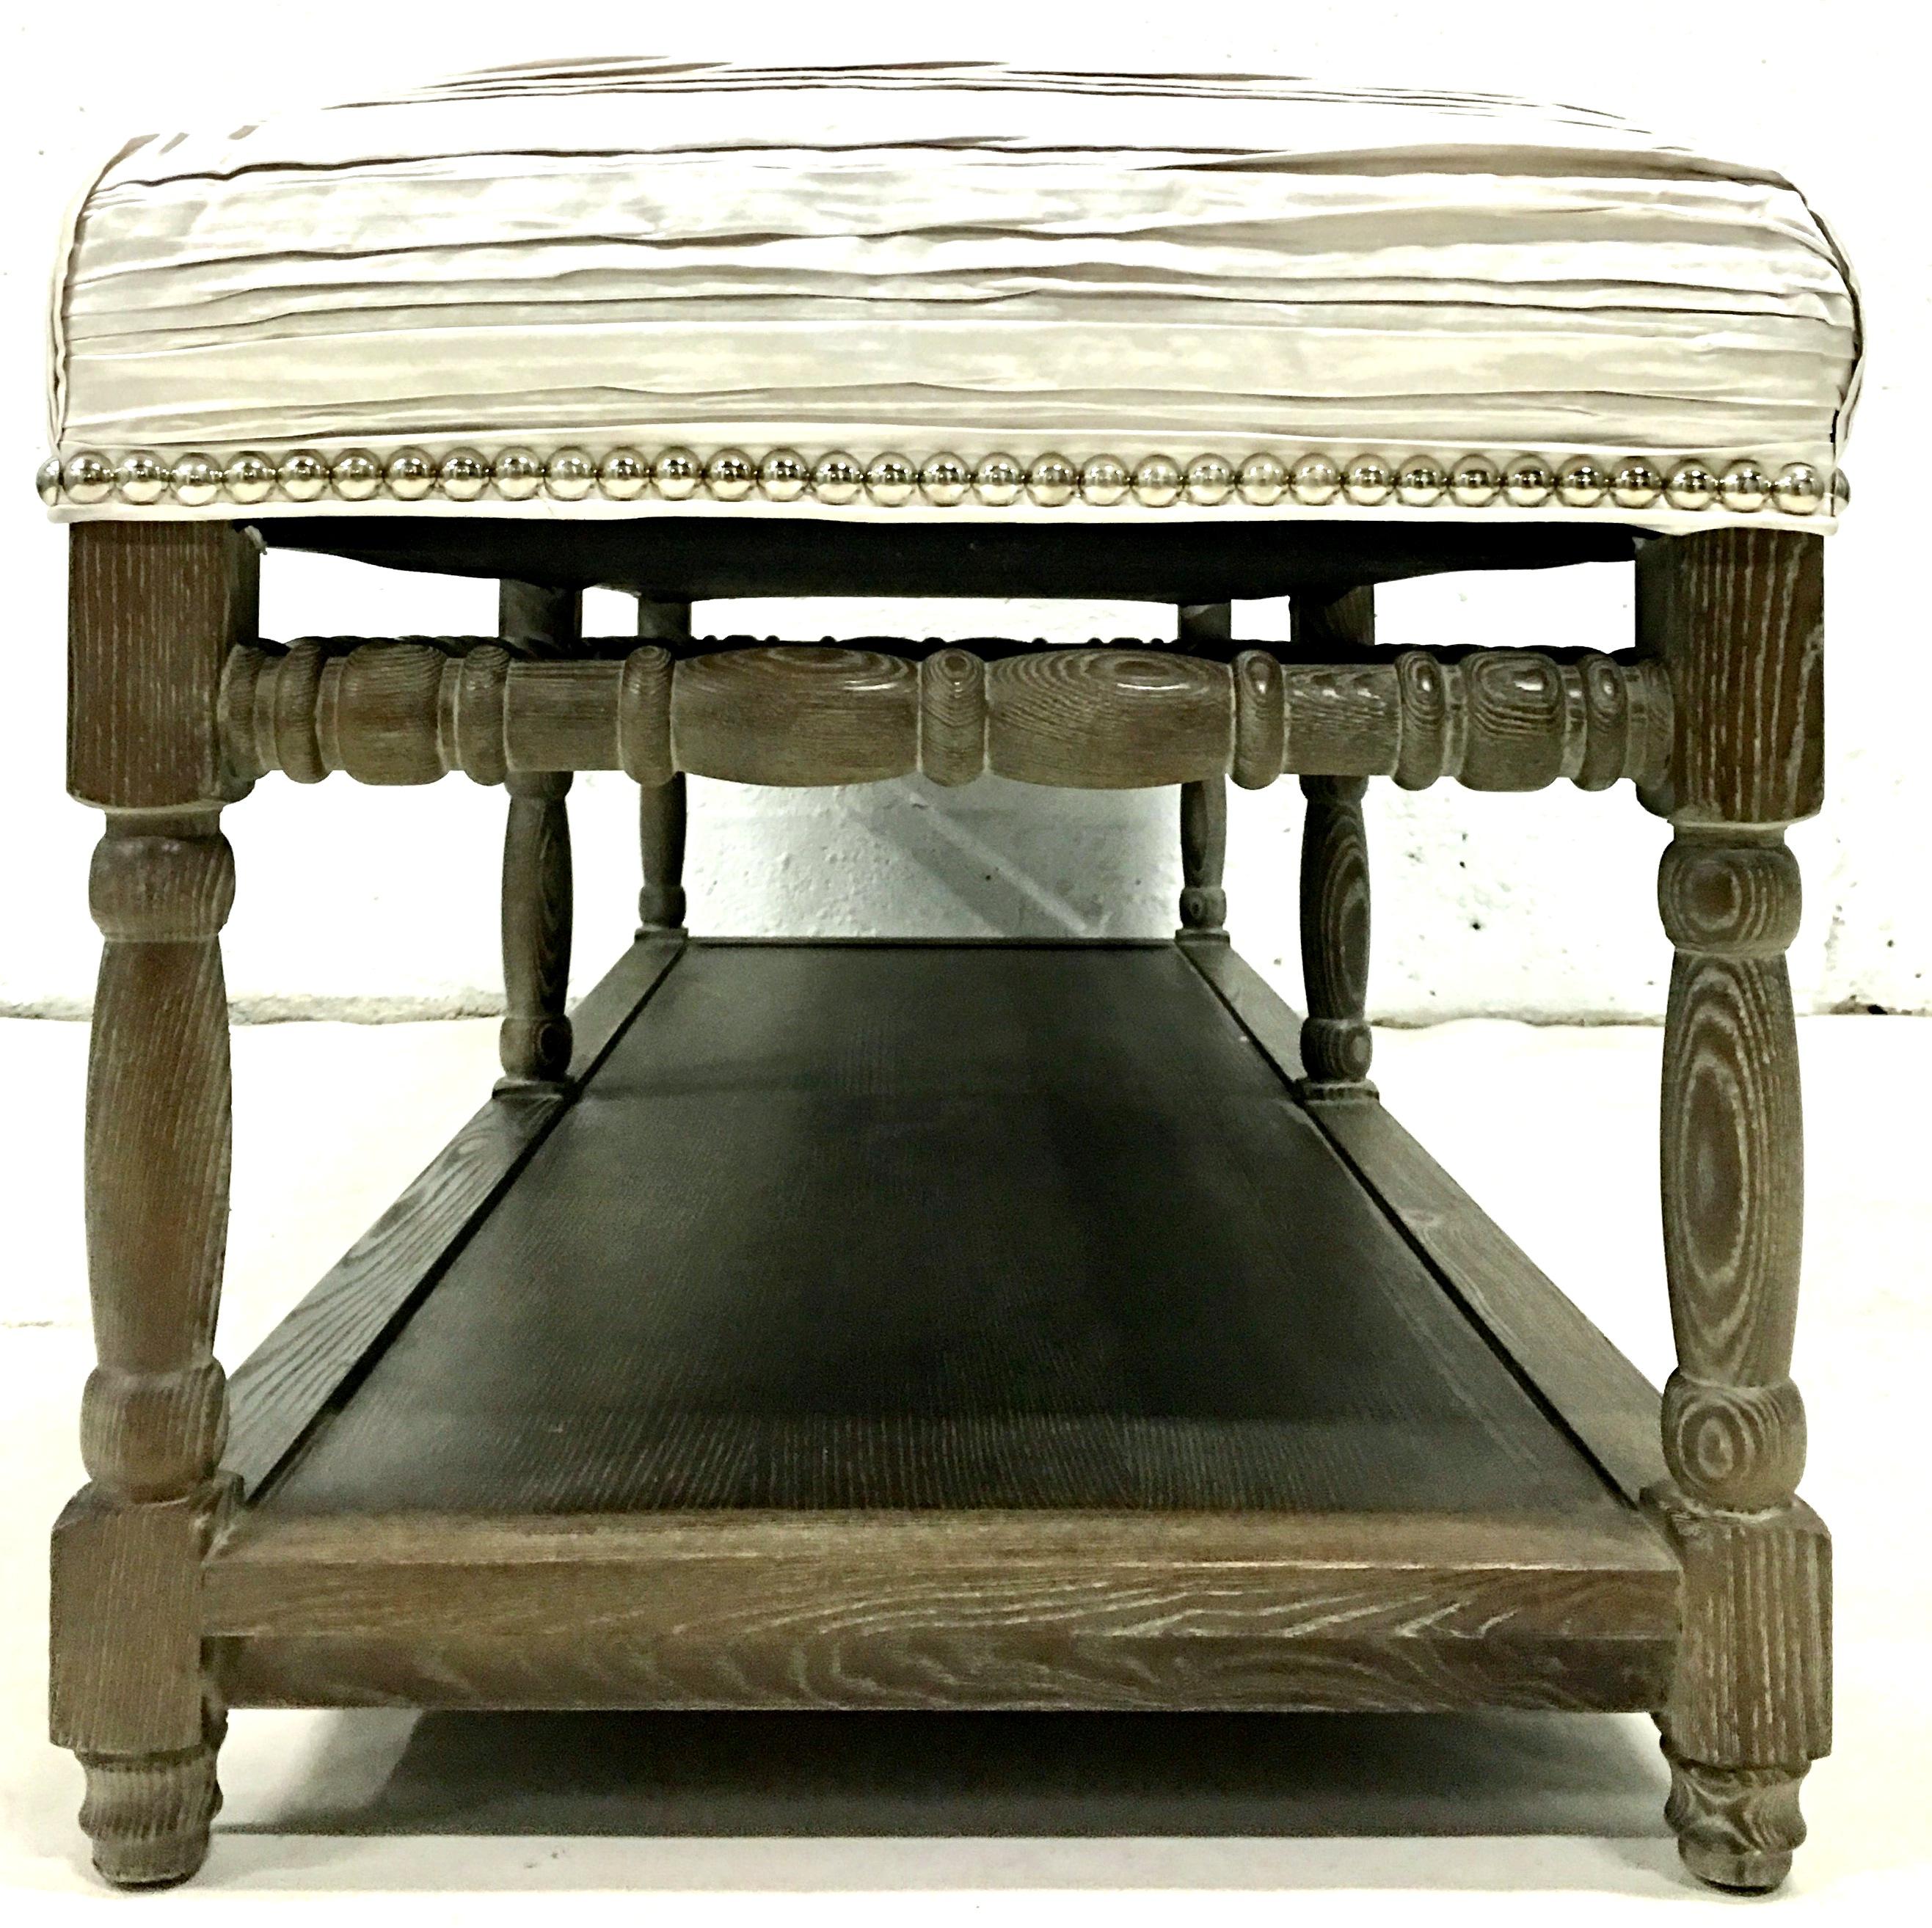 Contemporary 21st Century Modern Cerused Wood and Silver Silk Metallic Upholstered Wood Bench For Sale